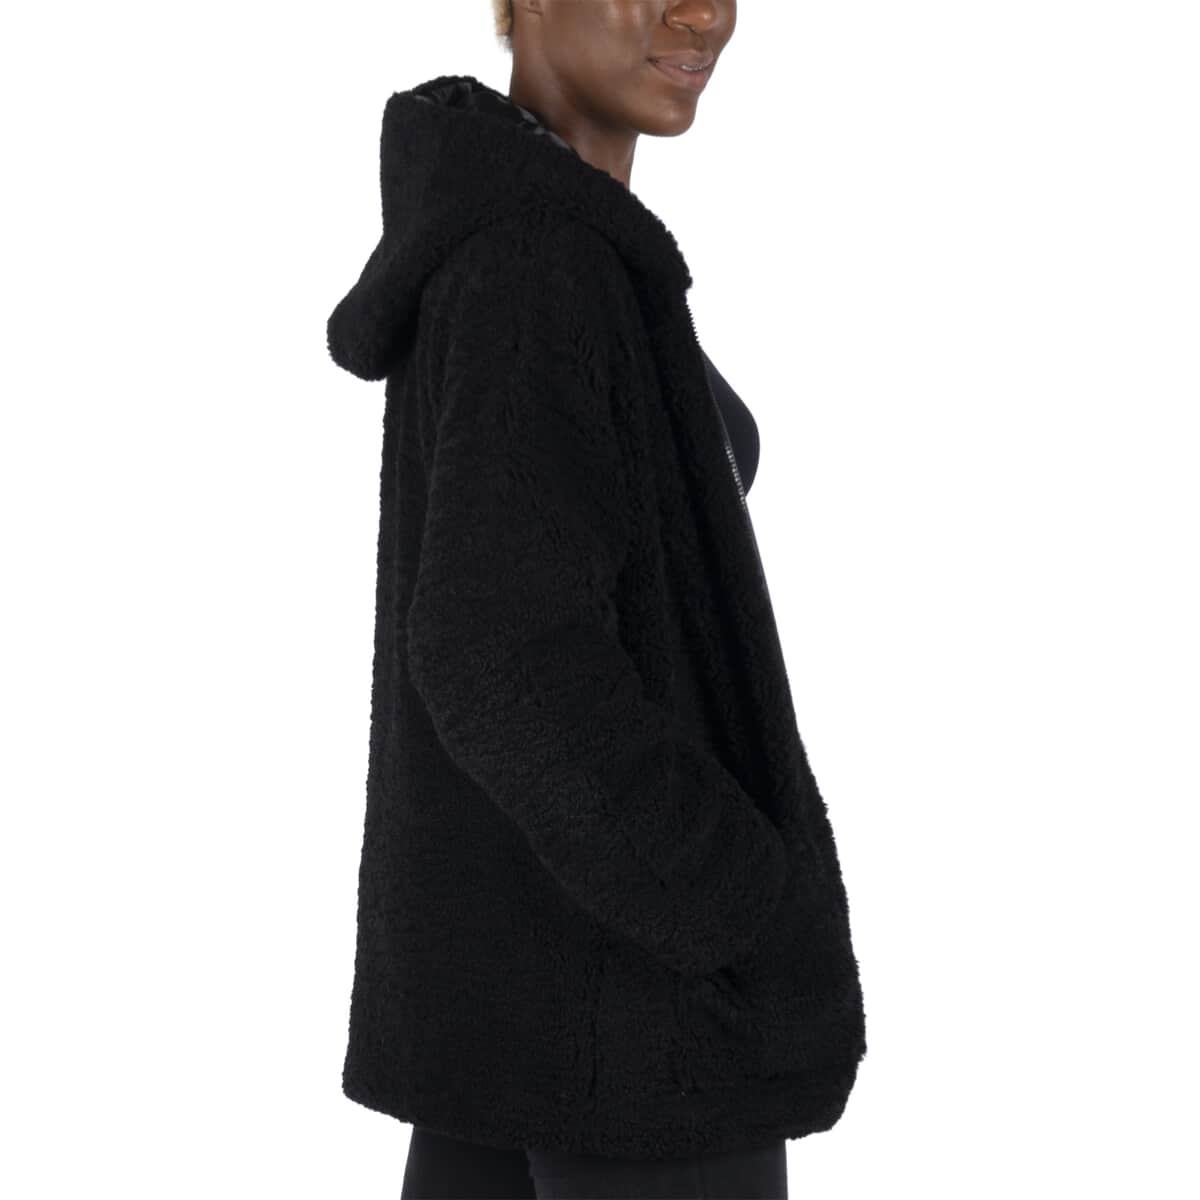 Black Satin Lined Faux Fur Hooded Jacket with Front Pockets (M, 100% Polyester) image number 1